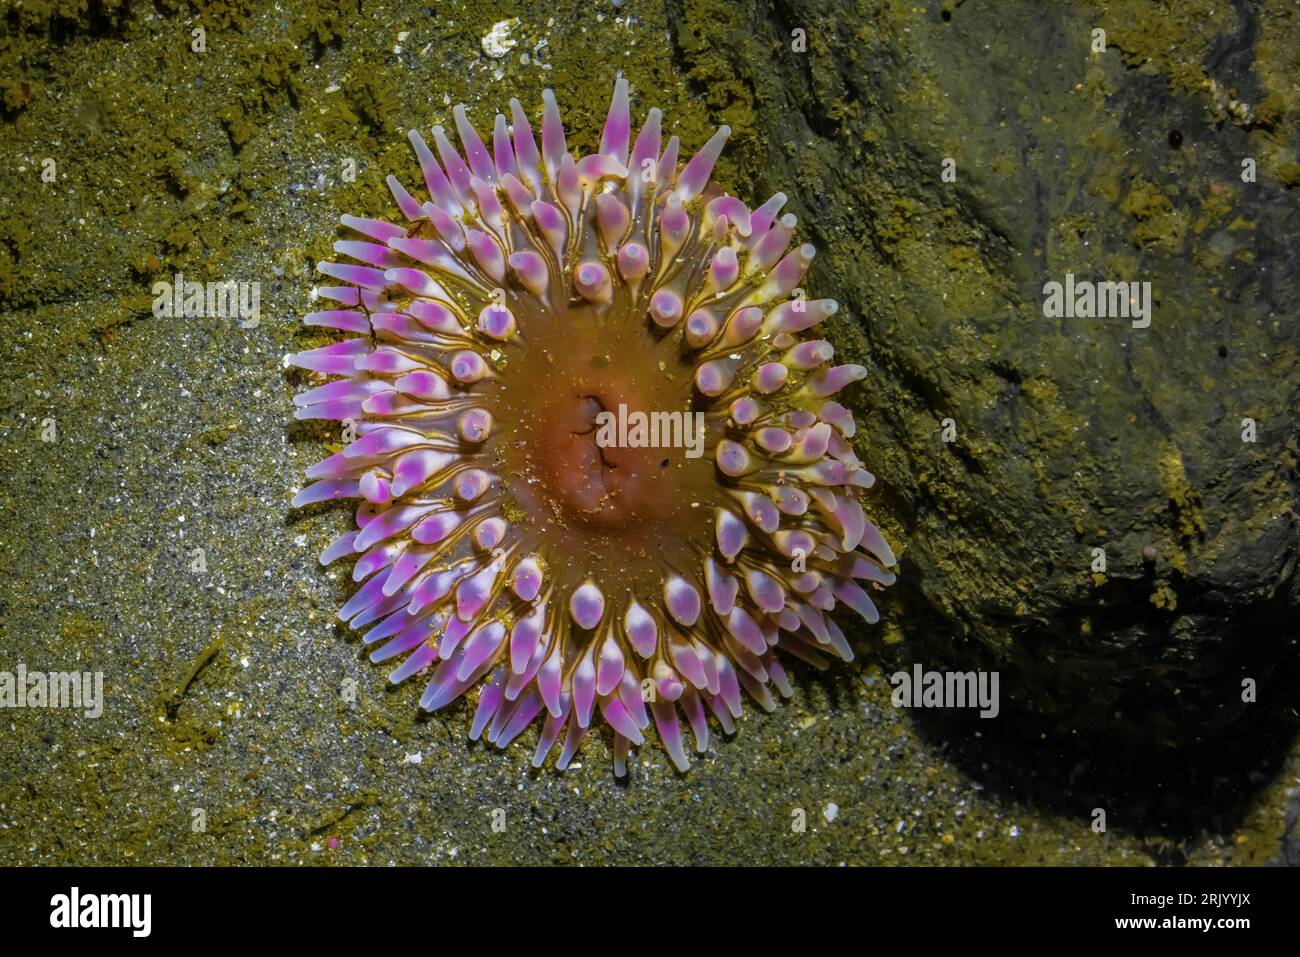 Pacific Stubby Rose Anemone, Urticina clandestina, at Point of Arches, Olympic National Park, Washington State, USA Stock Photo